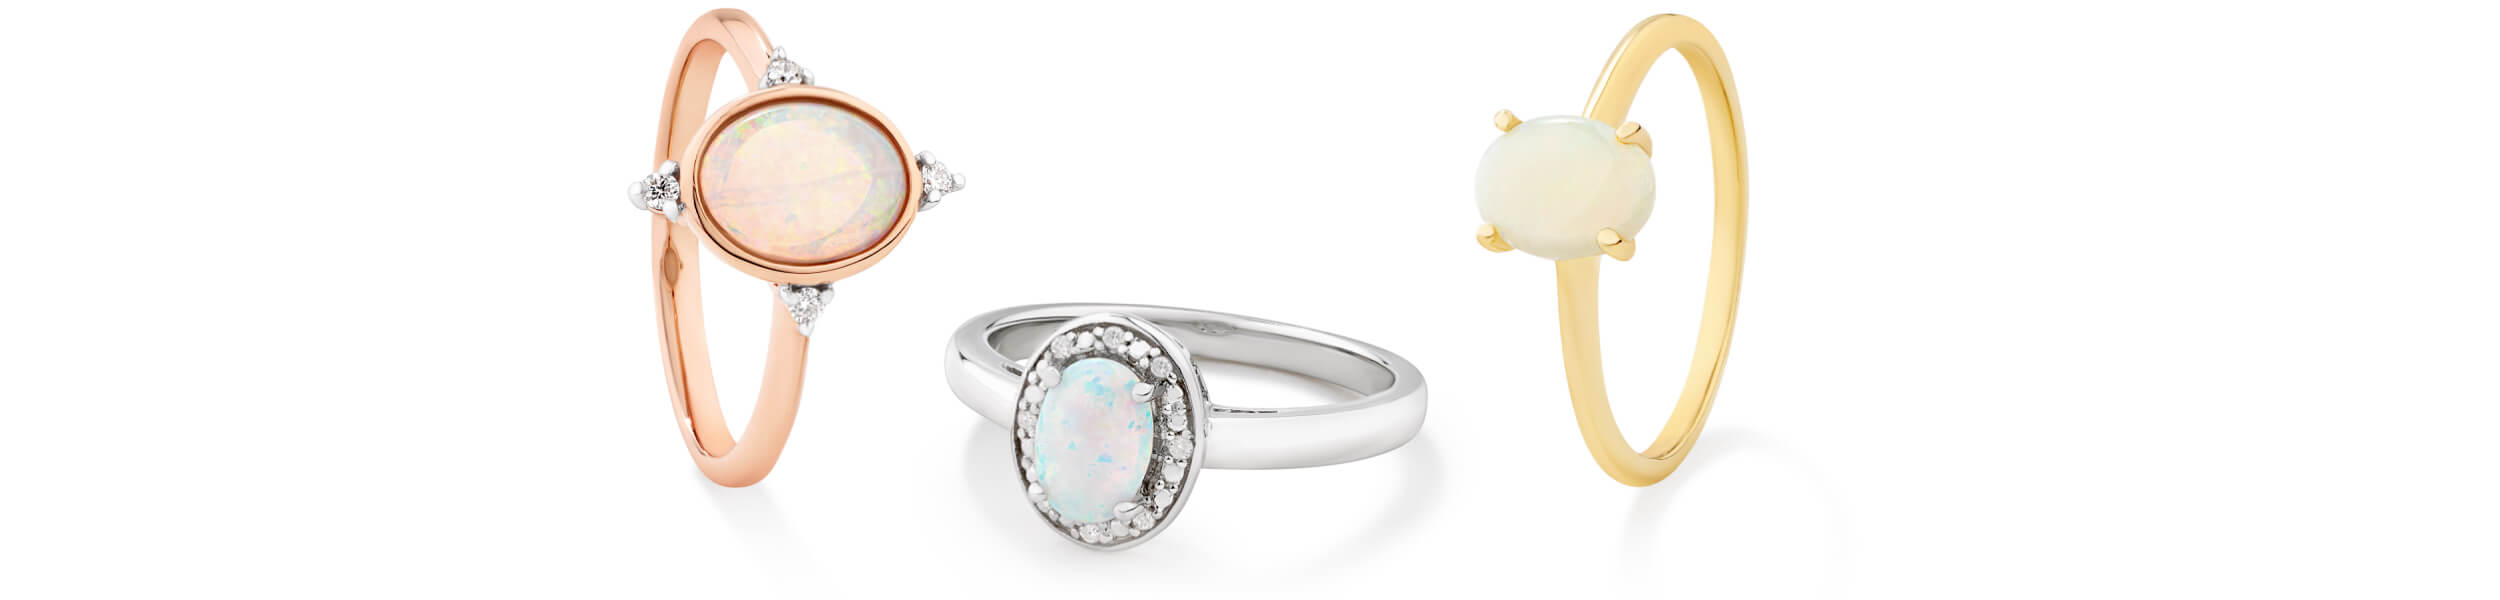 October Birthstones - Opal and Pink Tourmaline